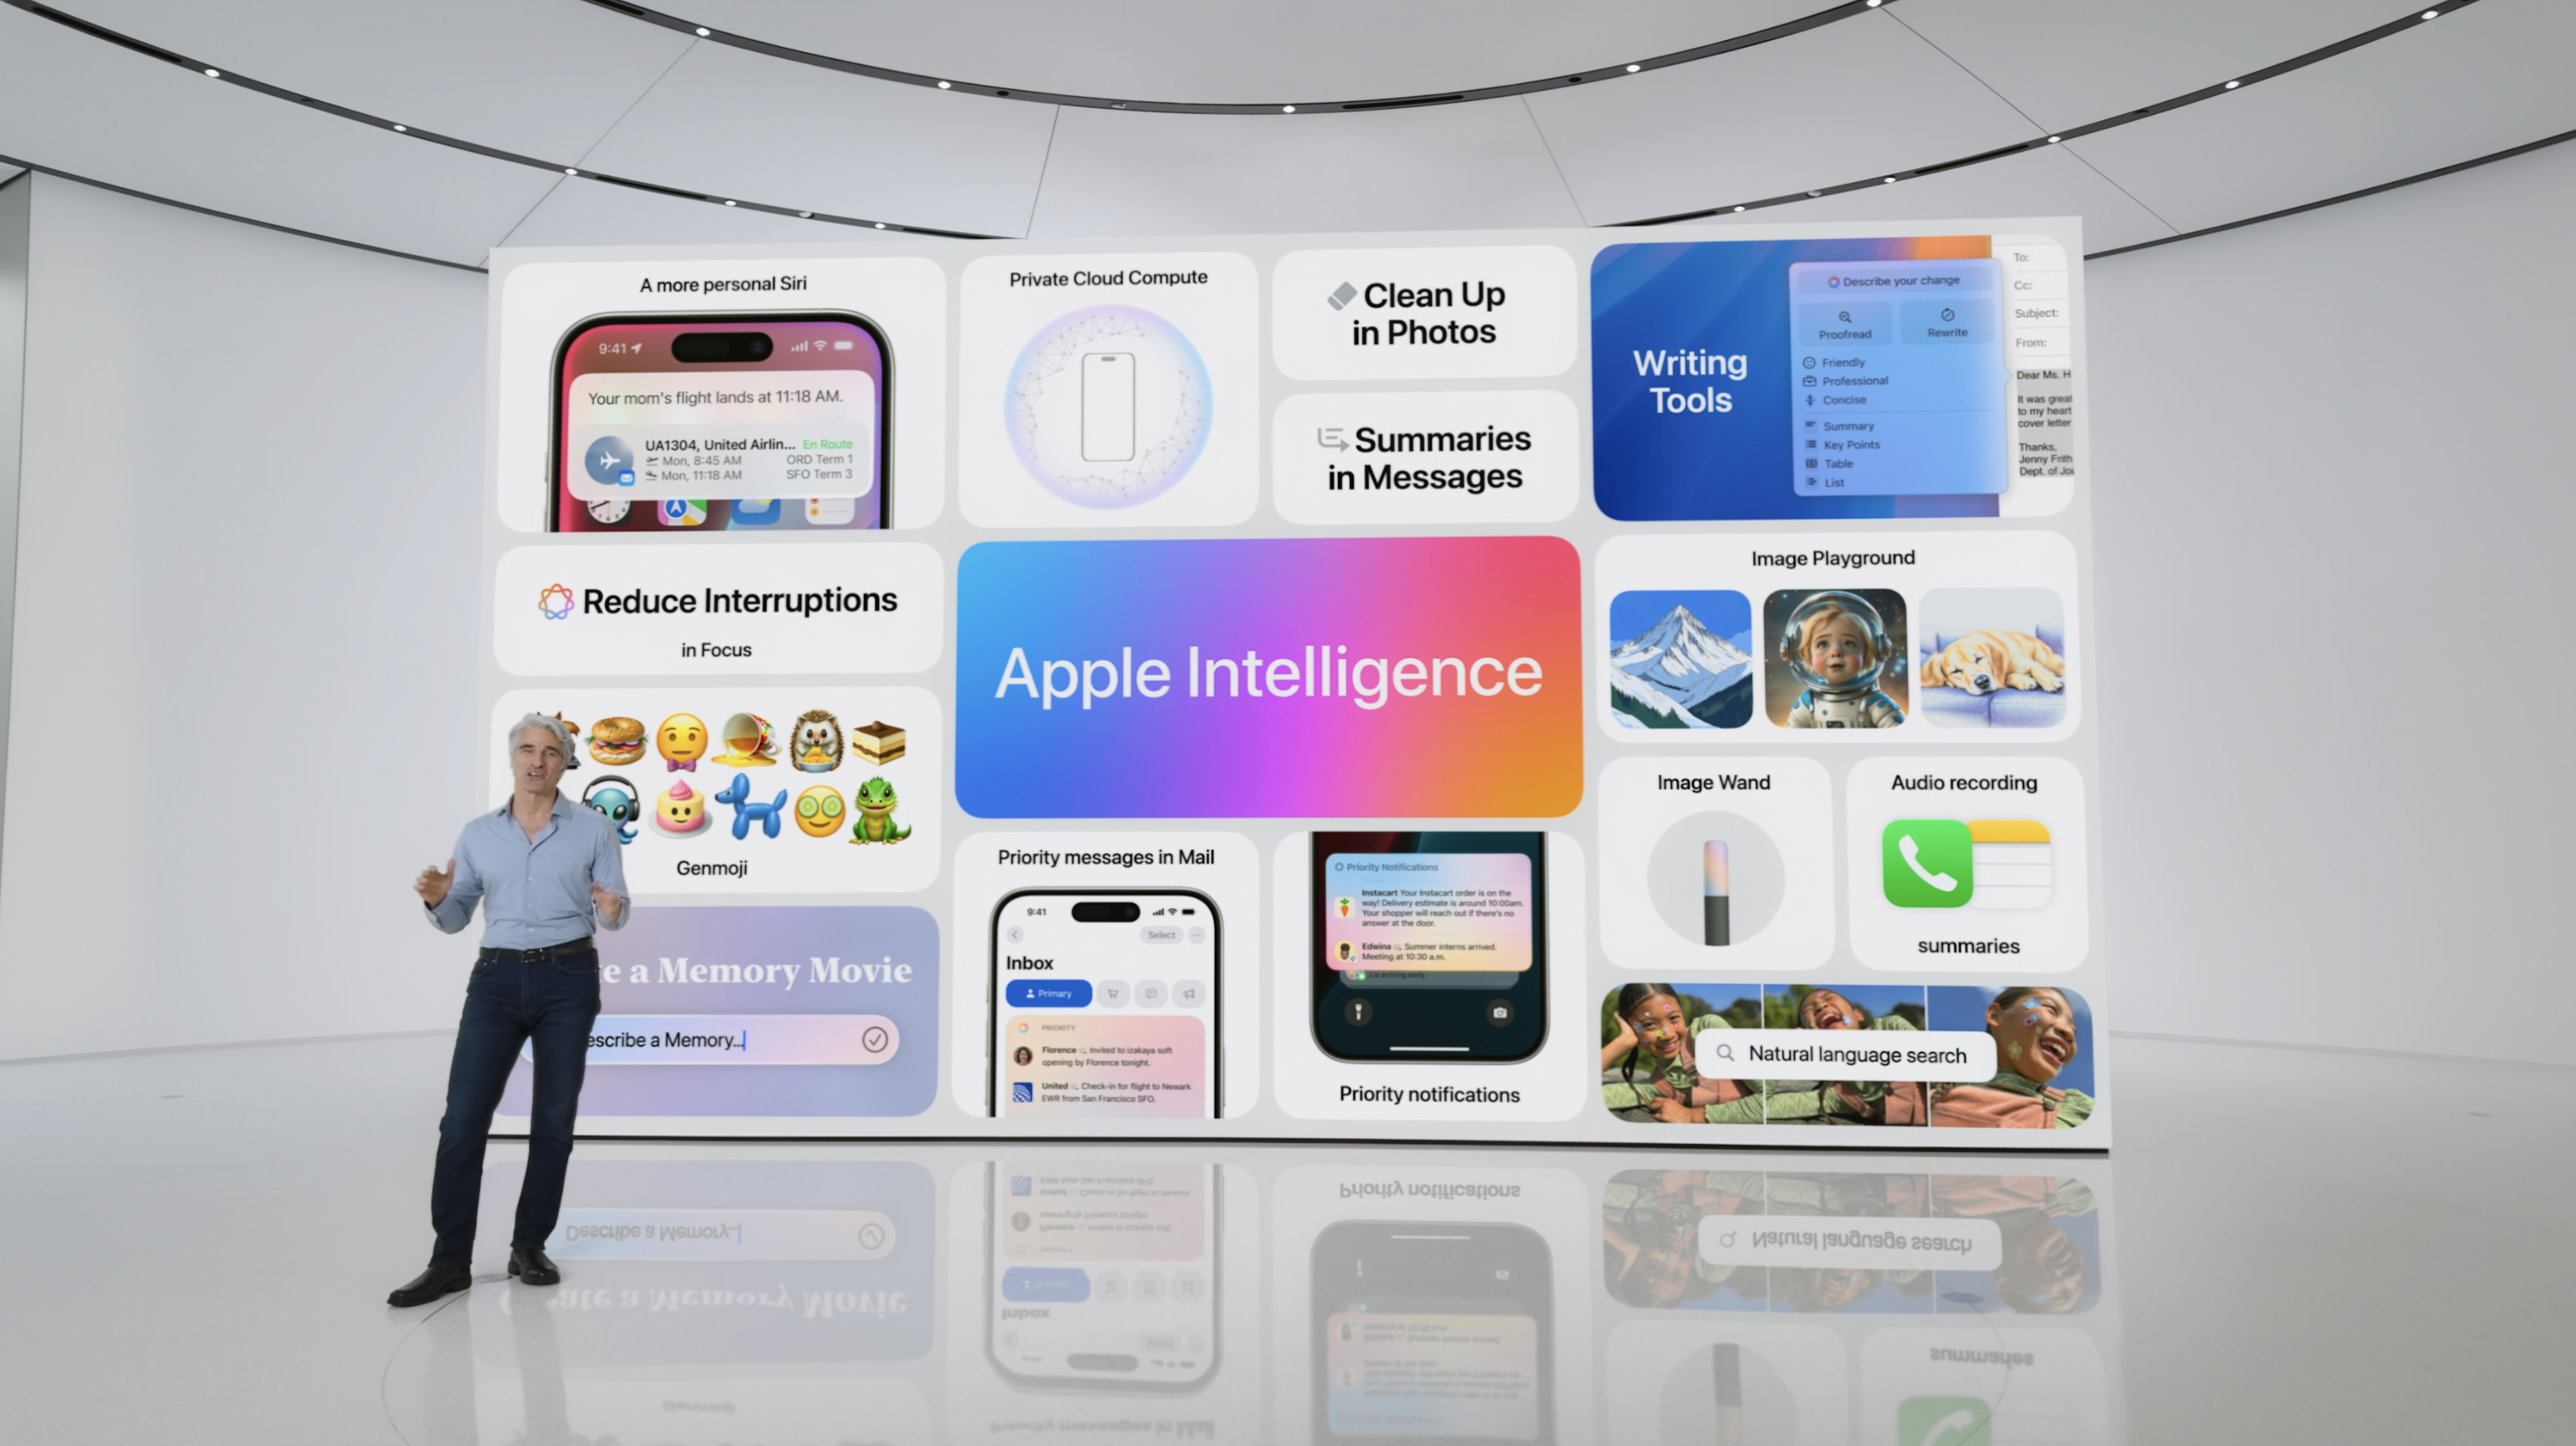 Apple’s big move into AI: The intelligence to help you, but Elon Musk thinks otherwise